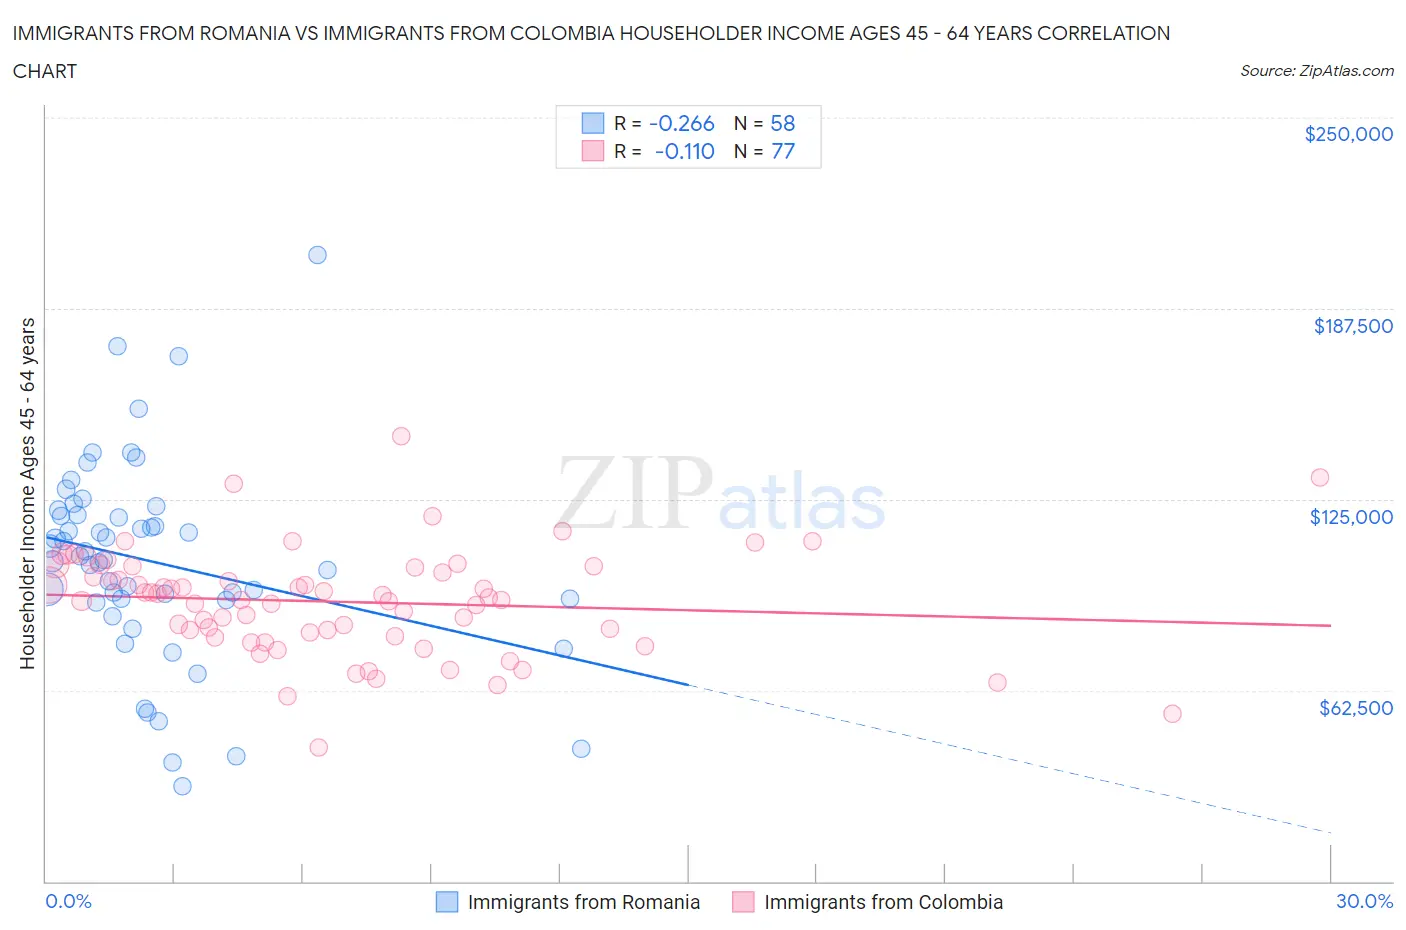 Immigrants from Romania vs Immigrants from Colombia Householder Income Ages 45 - 64 years